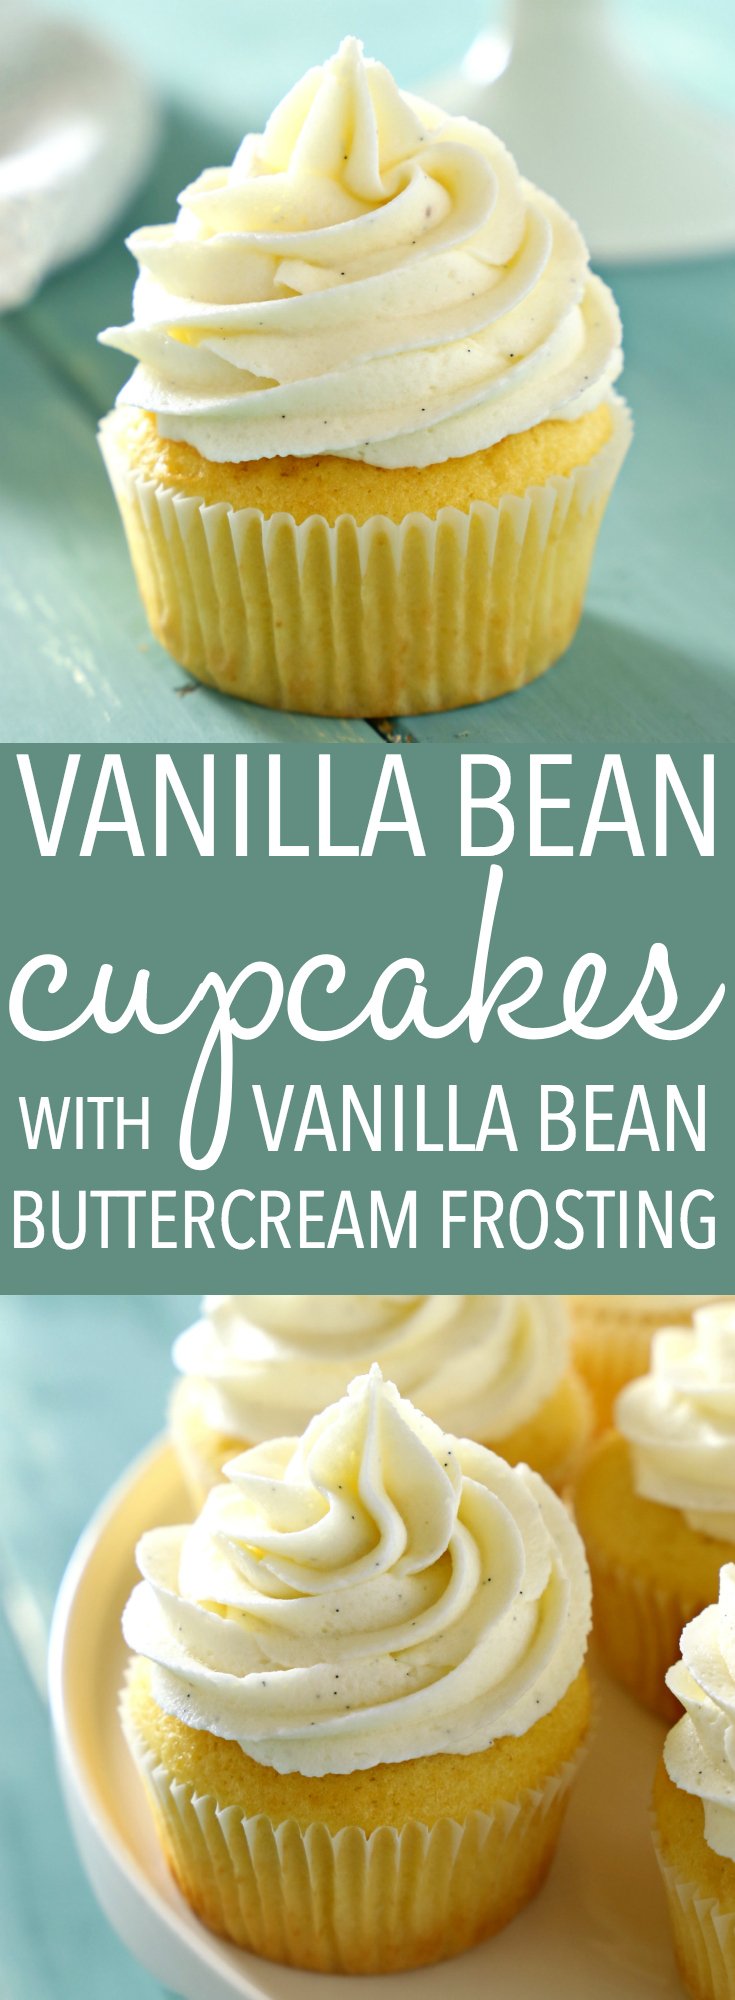 These Vanilla Bean Cupcakes are tender and fluffy and topped with ultra creamy mascarpone buttercream frosting made with real vanilla beans! They're perfect for parties, birthdays, or any occasion at all! Recipe from thebusybaker.ca! #bestevervanillacupcakes #easyvanillacupcakes #vanillabeancupcakerecipe via @busybakerblog